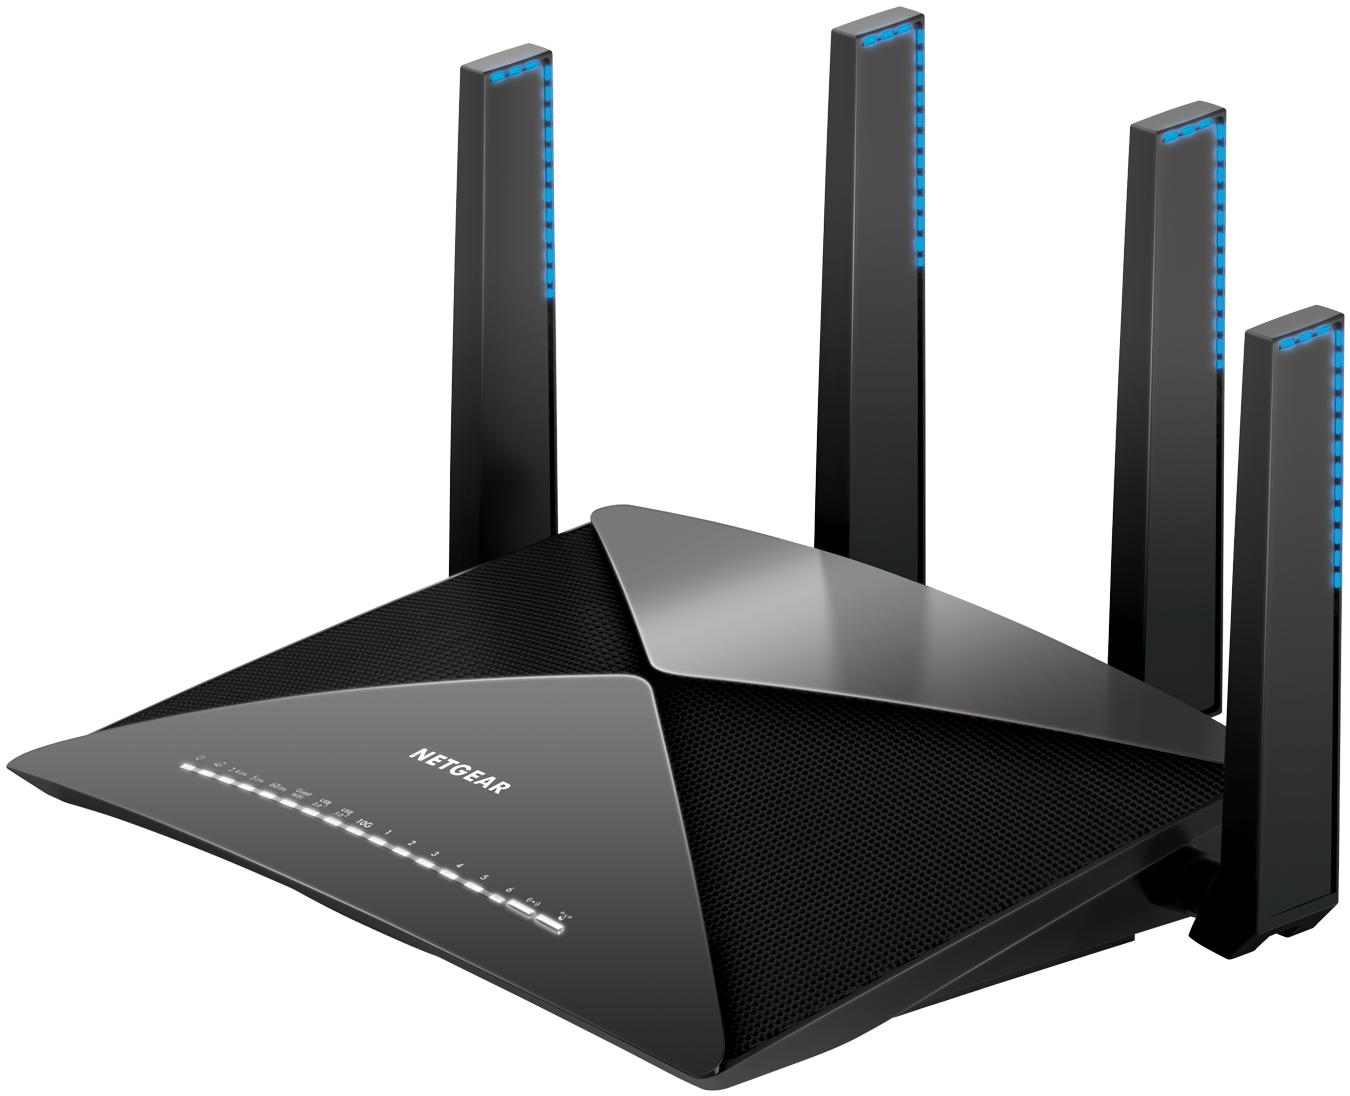 NETGEAR Nighthawk X10 – AD7200 802.11ac/ad WiFi Router with 1.7GHz Quad-core Processor (R9000) - image 5 of 6